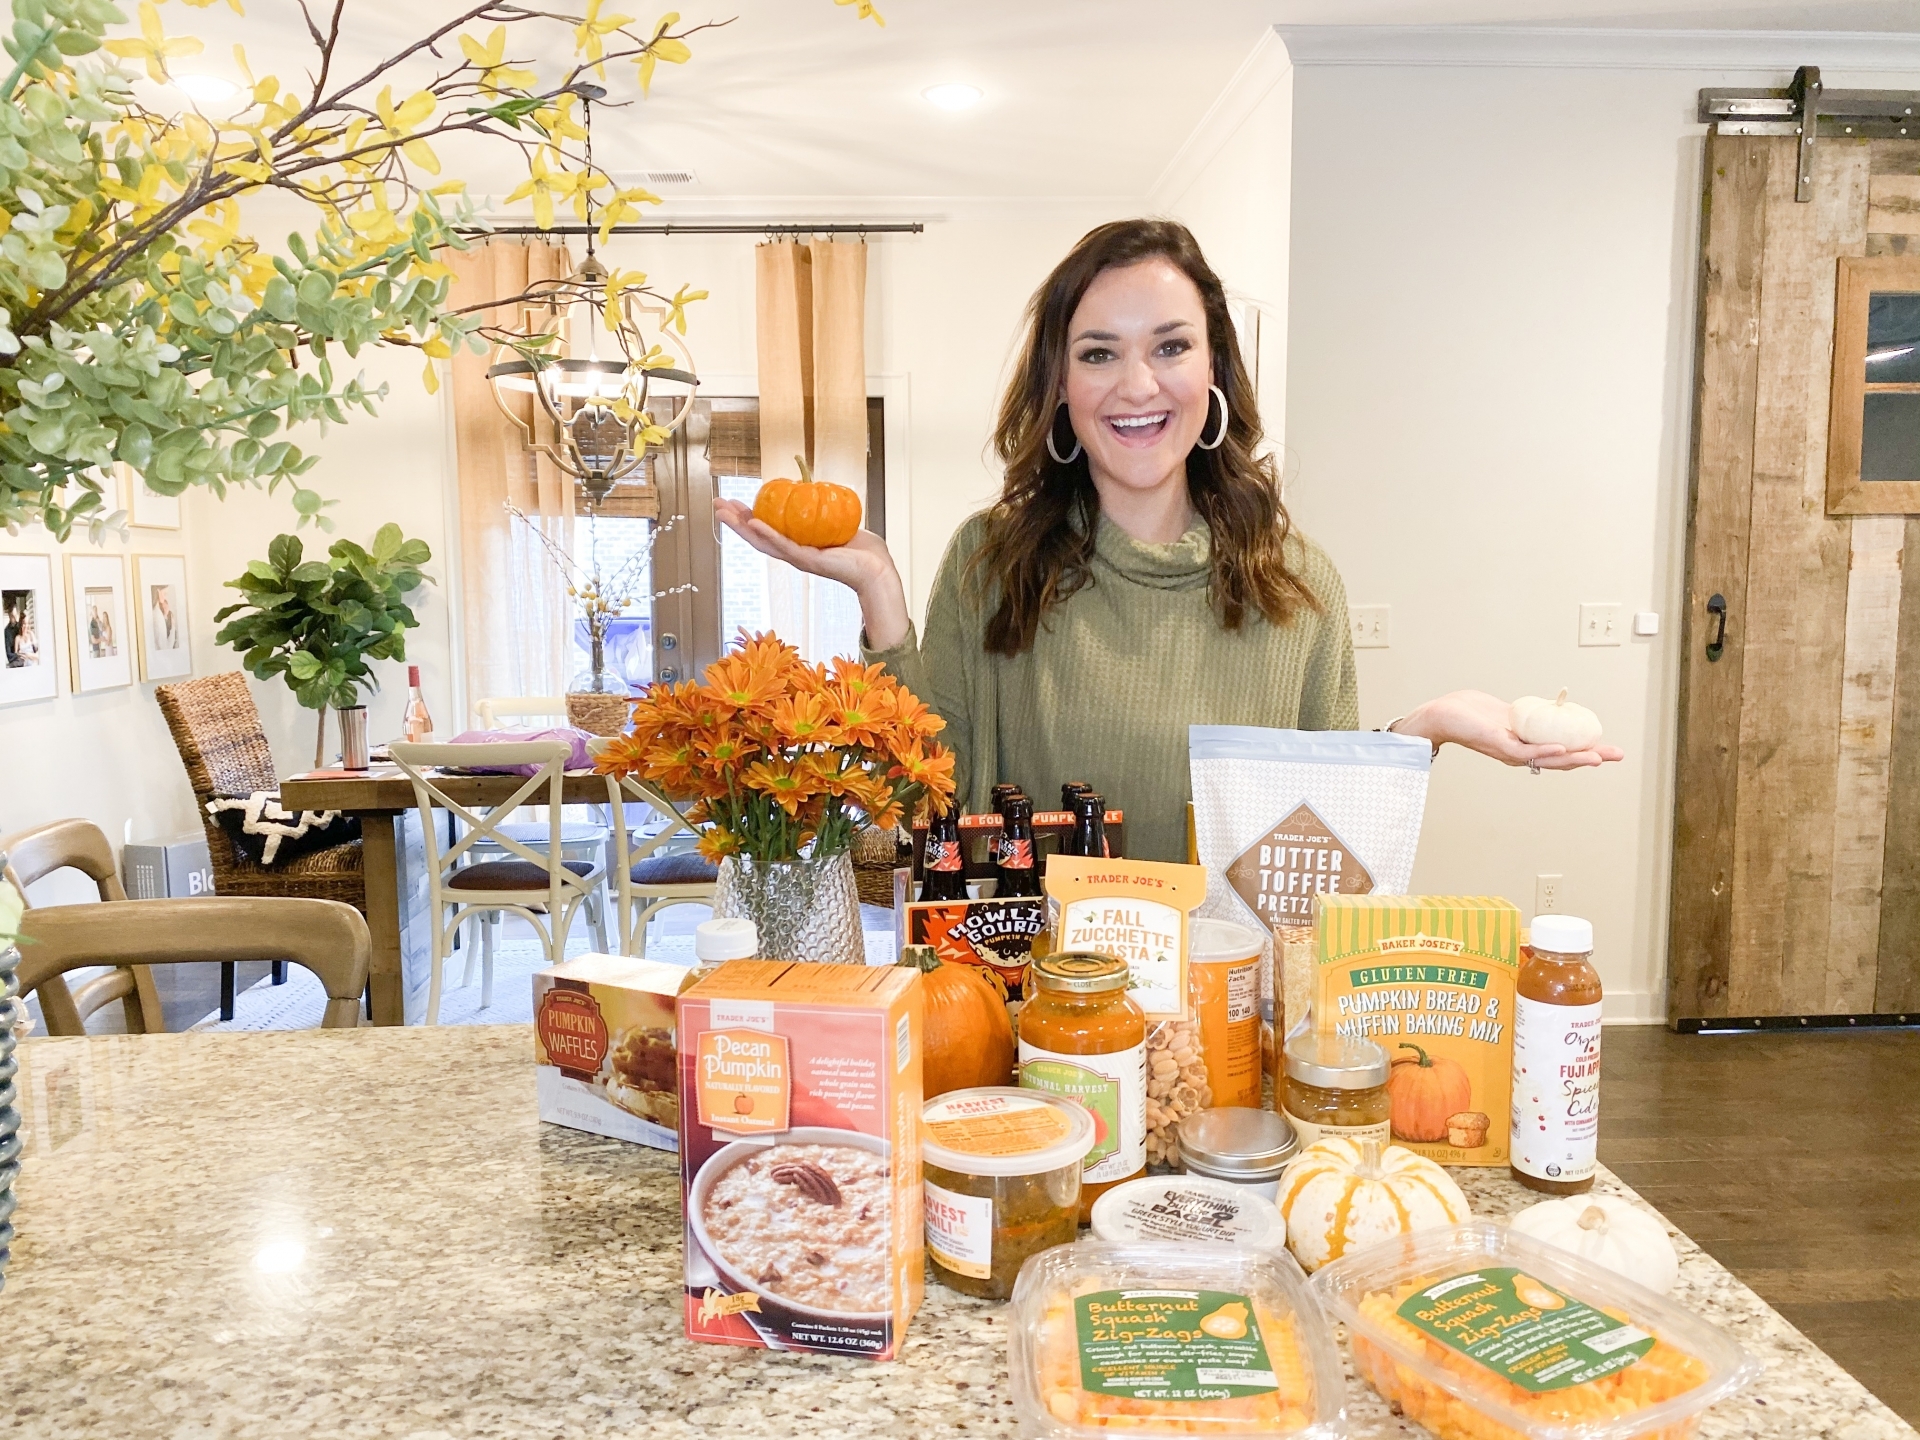 Trader Joe's Shopping Haul by Alabama Life + Family blogger, Heather Brown // My Life Well Loved